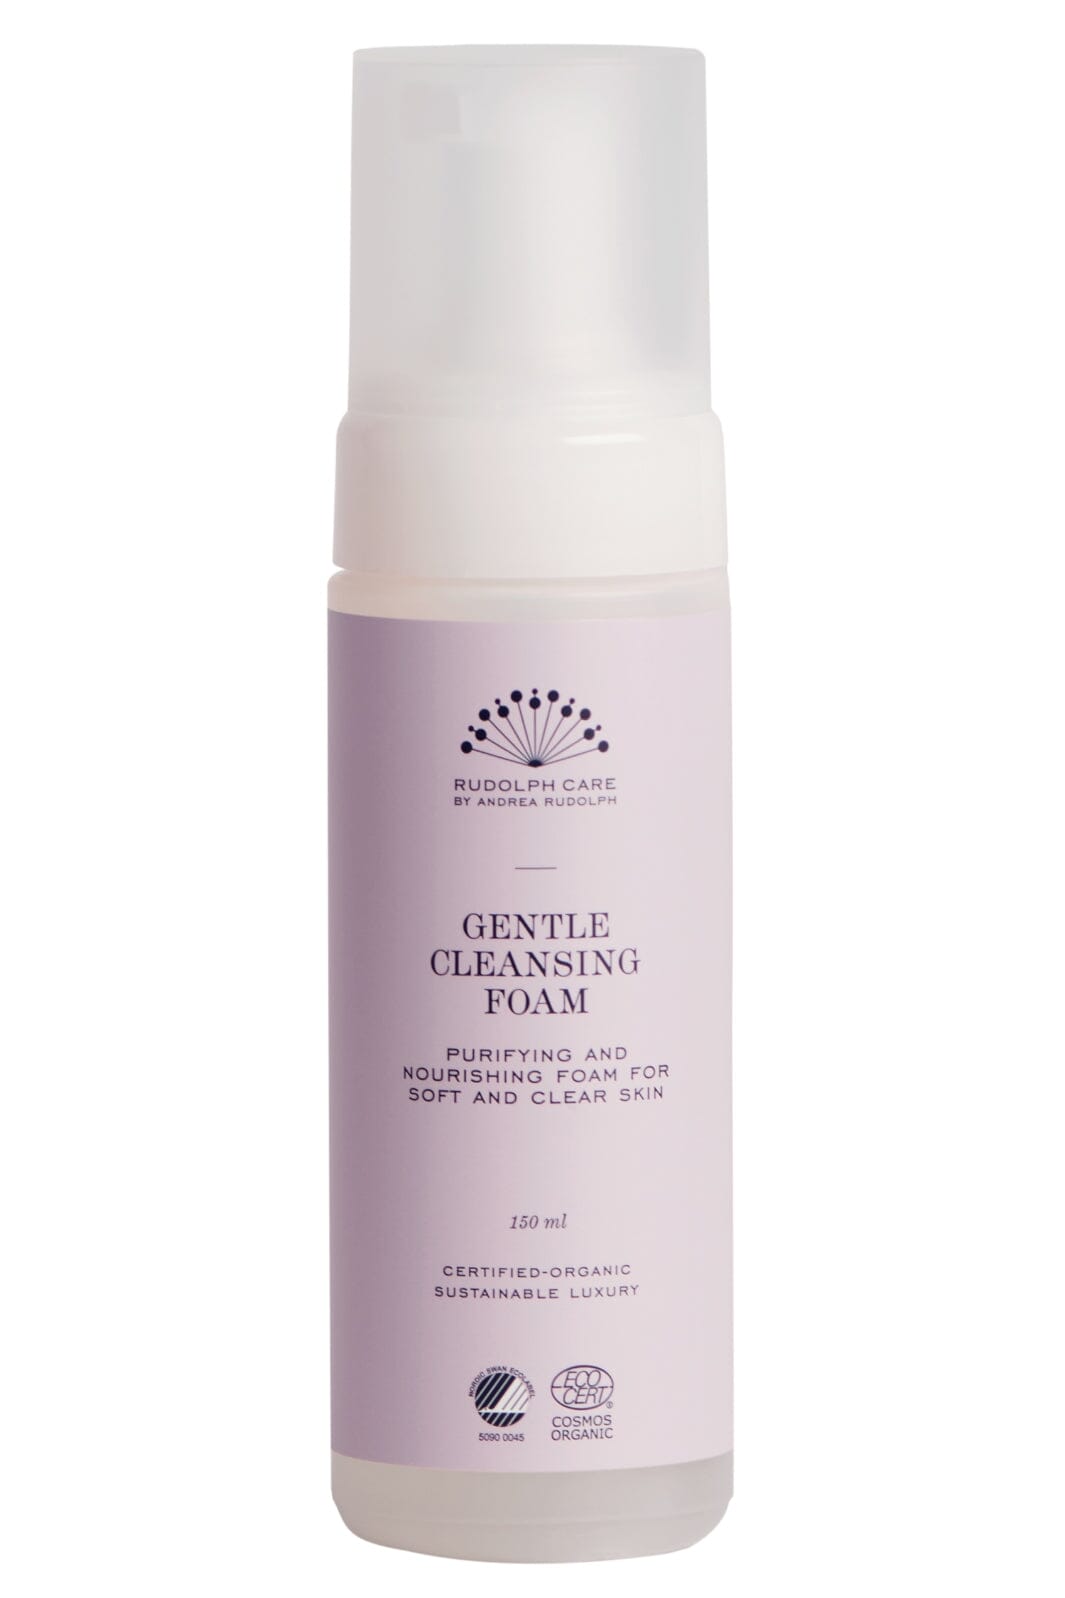 Rudolph Care - Gentle Cleansing Foam Rens 